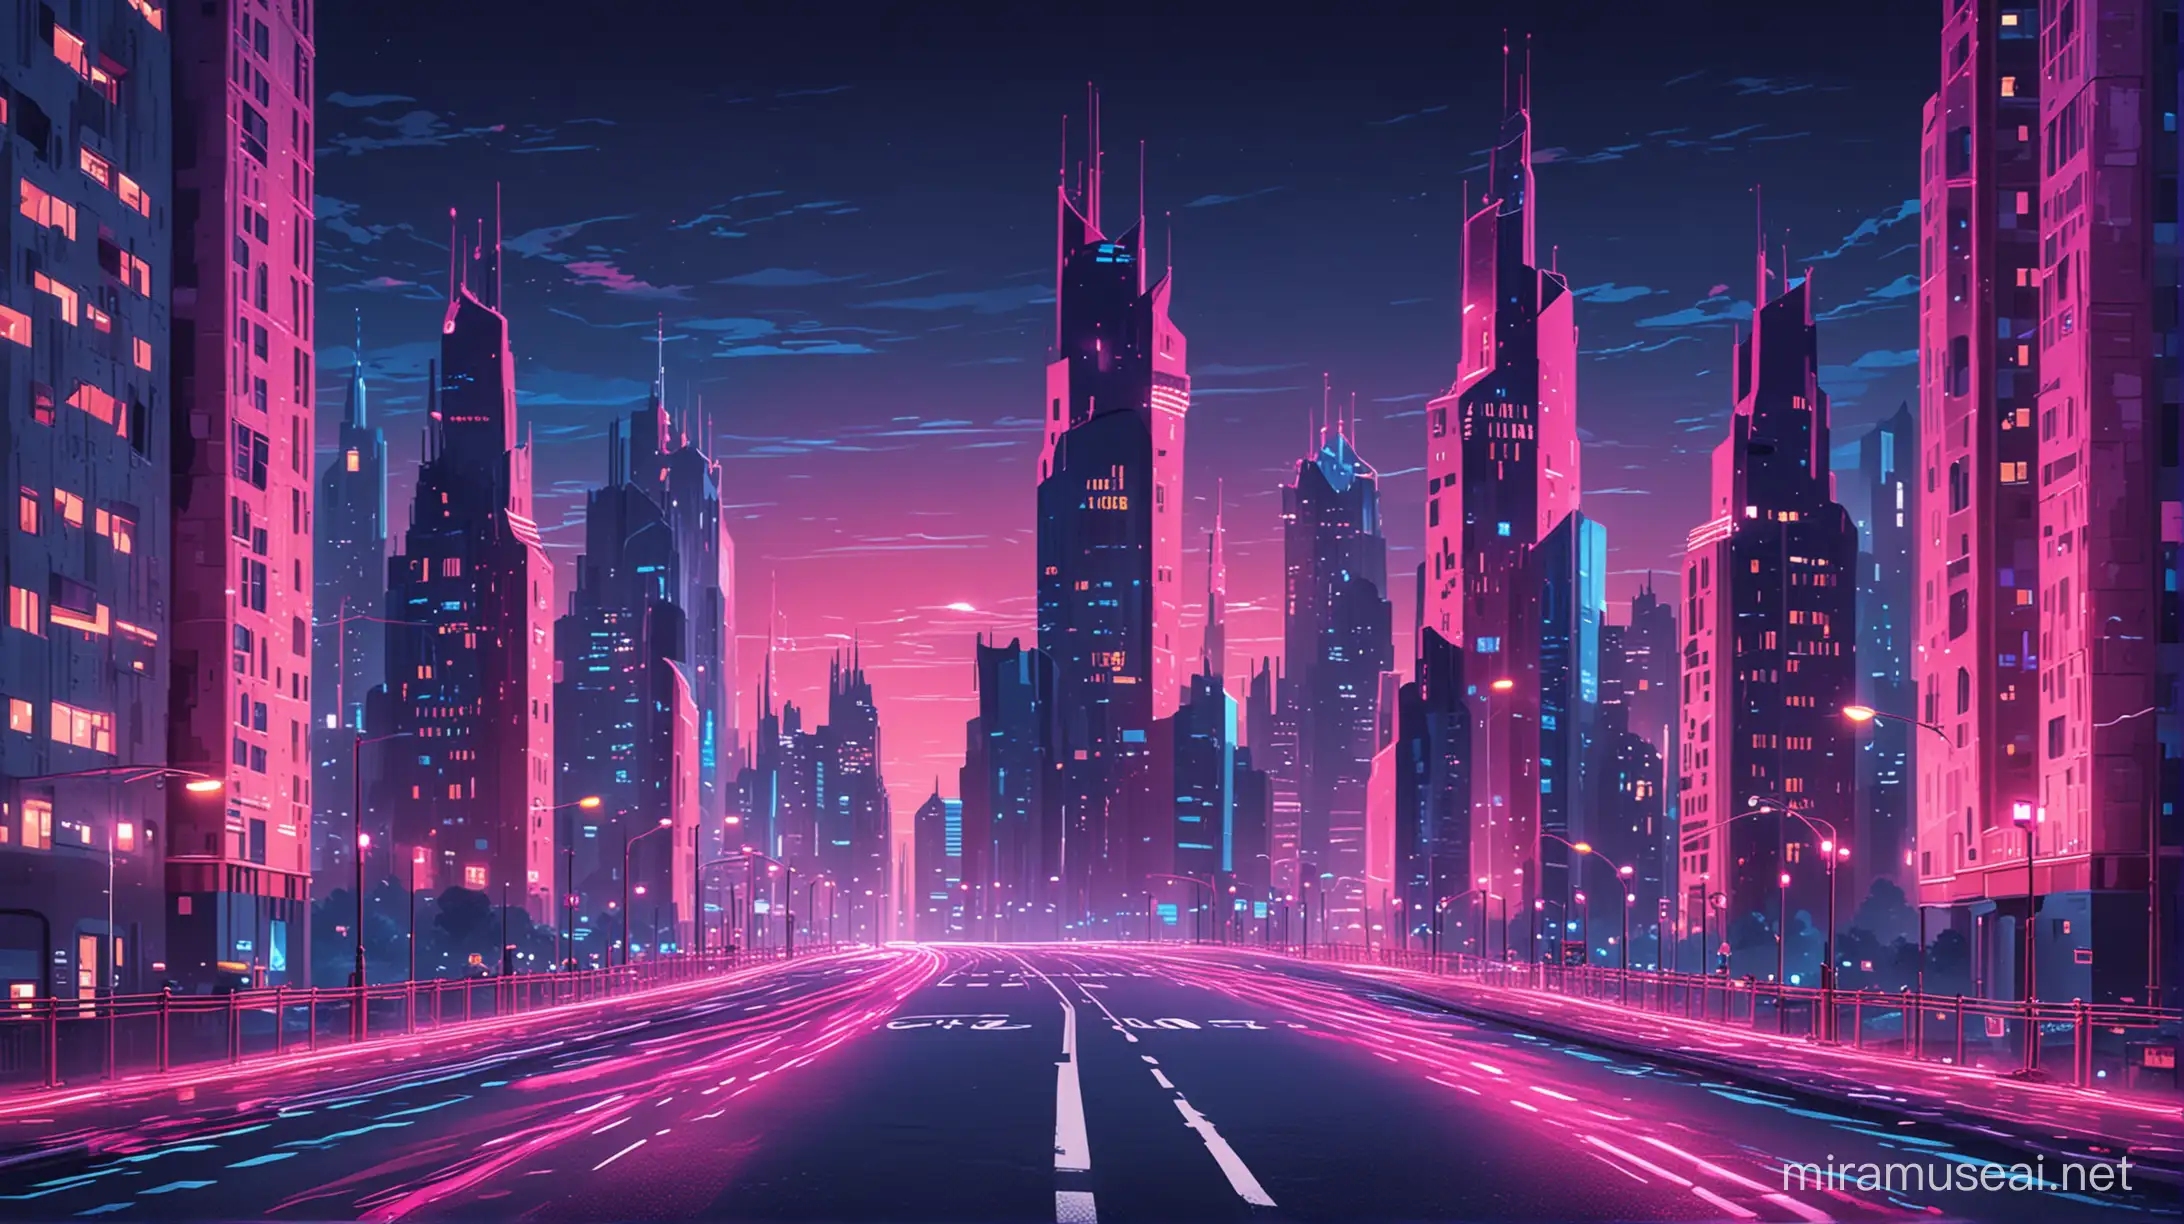 Vibrant Nighttime Cityscape with Cartoon Architecture and Neon Lights